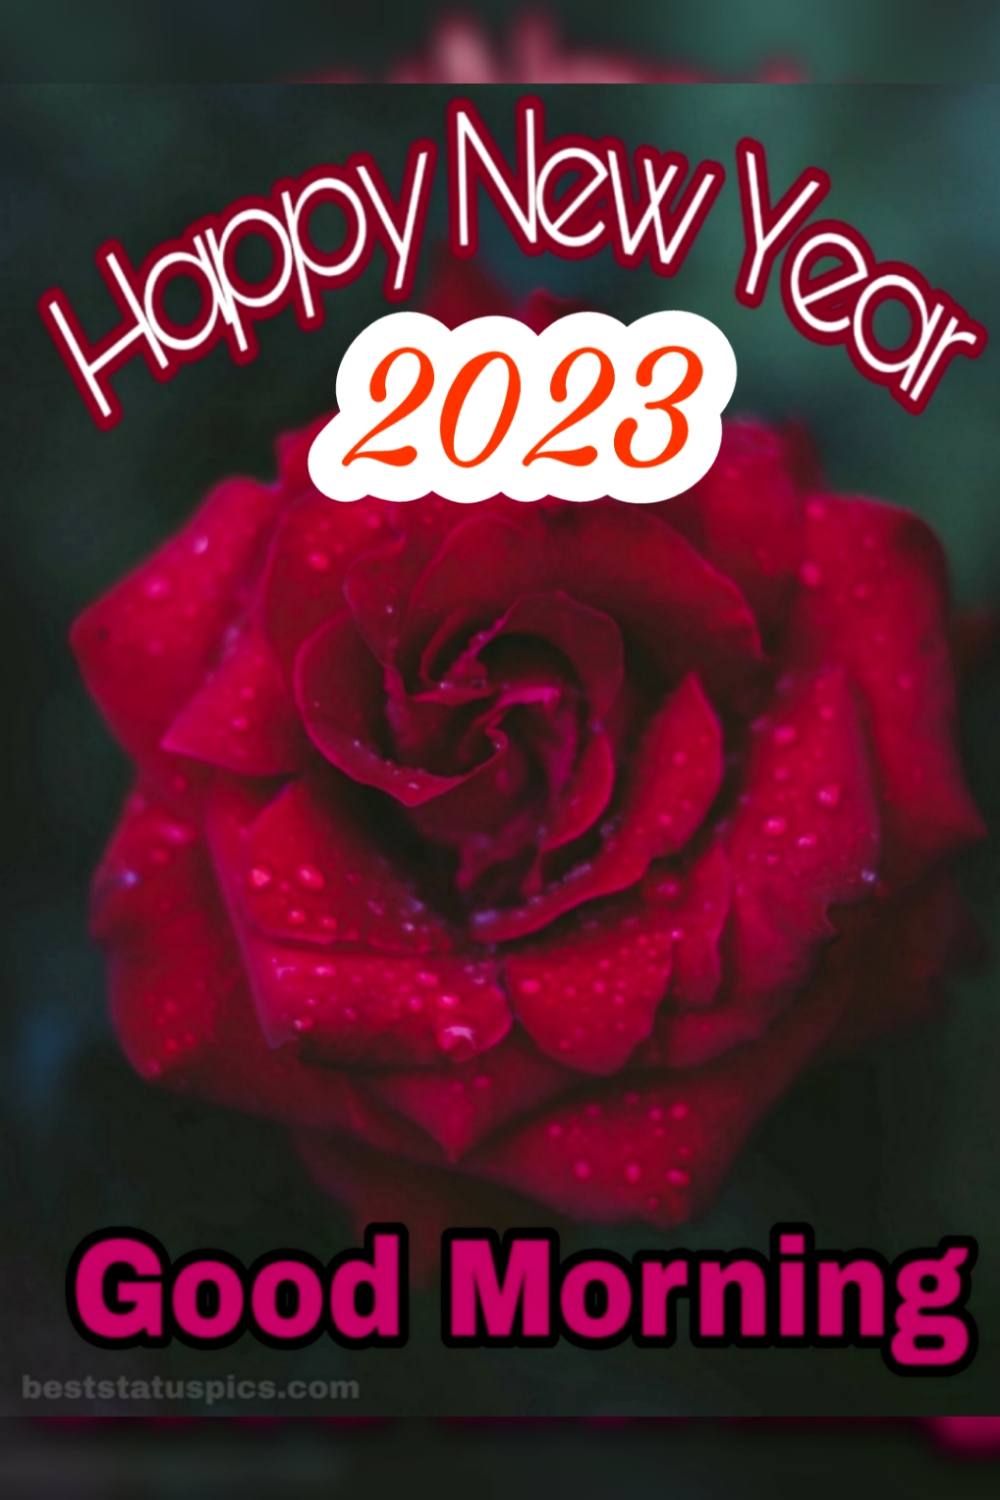 51+ Good Morning Happy New Year 2023 Wishes Images HD - Best ...